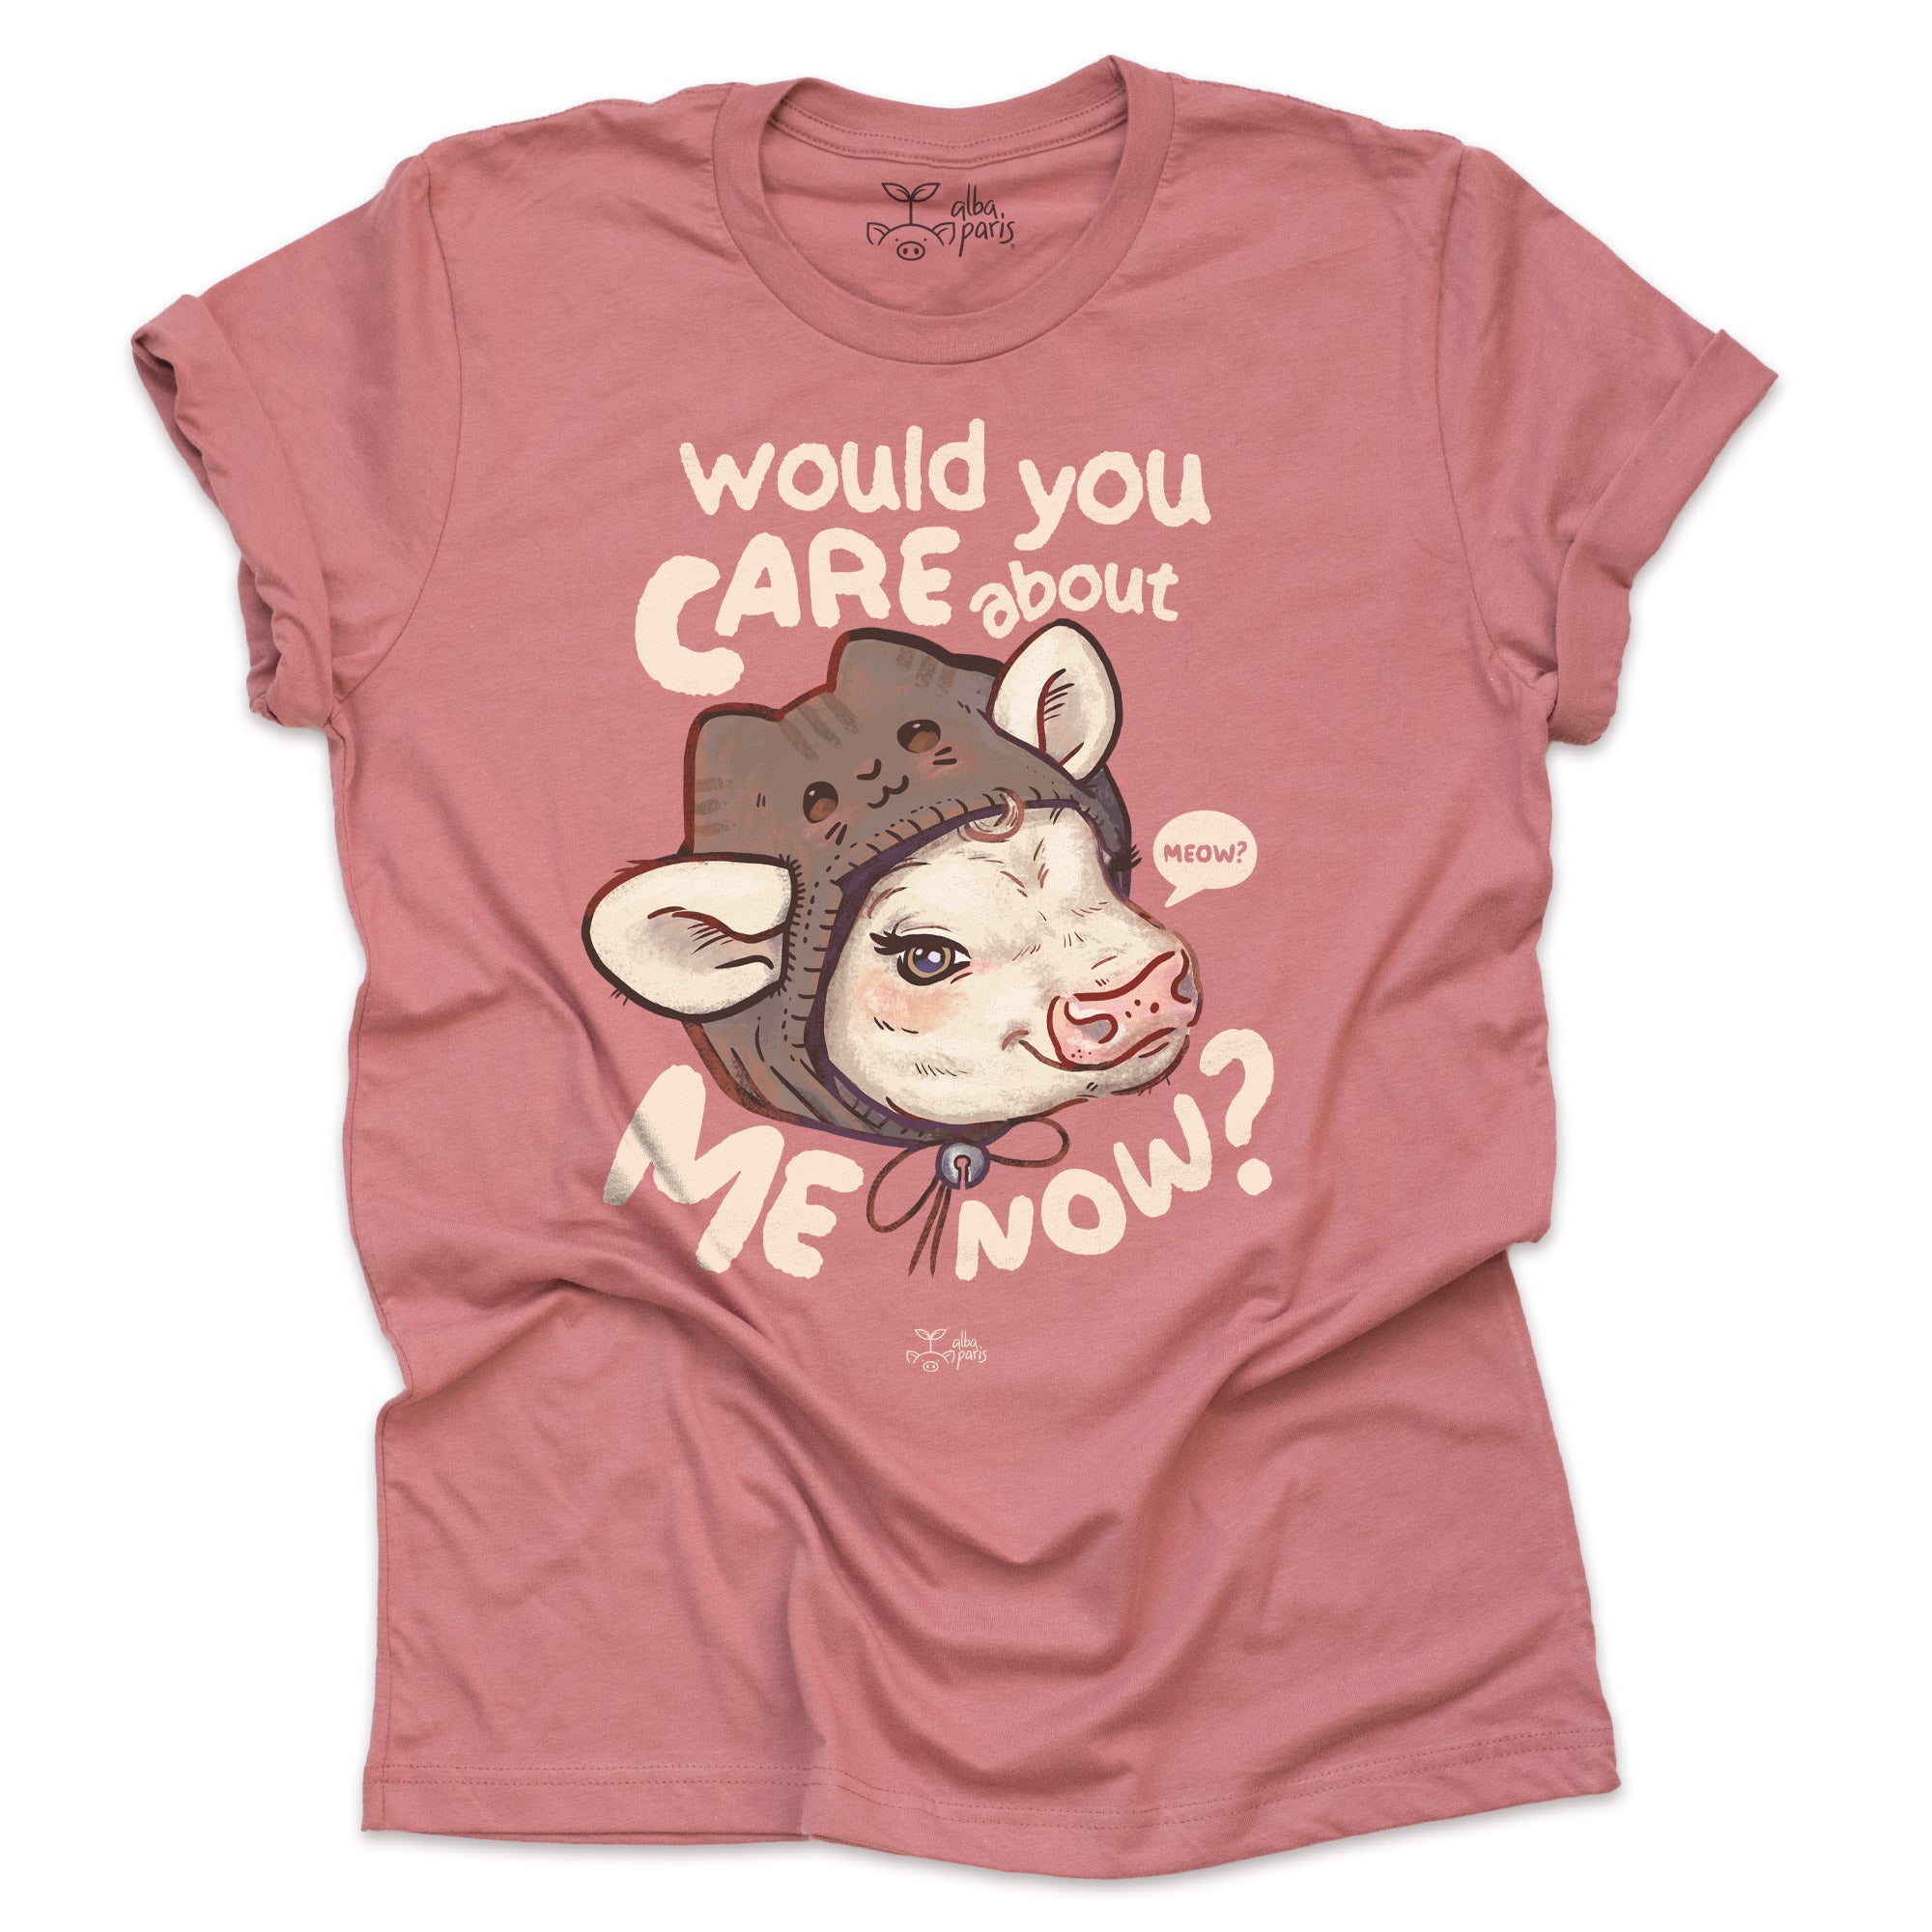 Would You Care About Me Now? Cow Unisex Tee